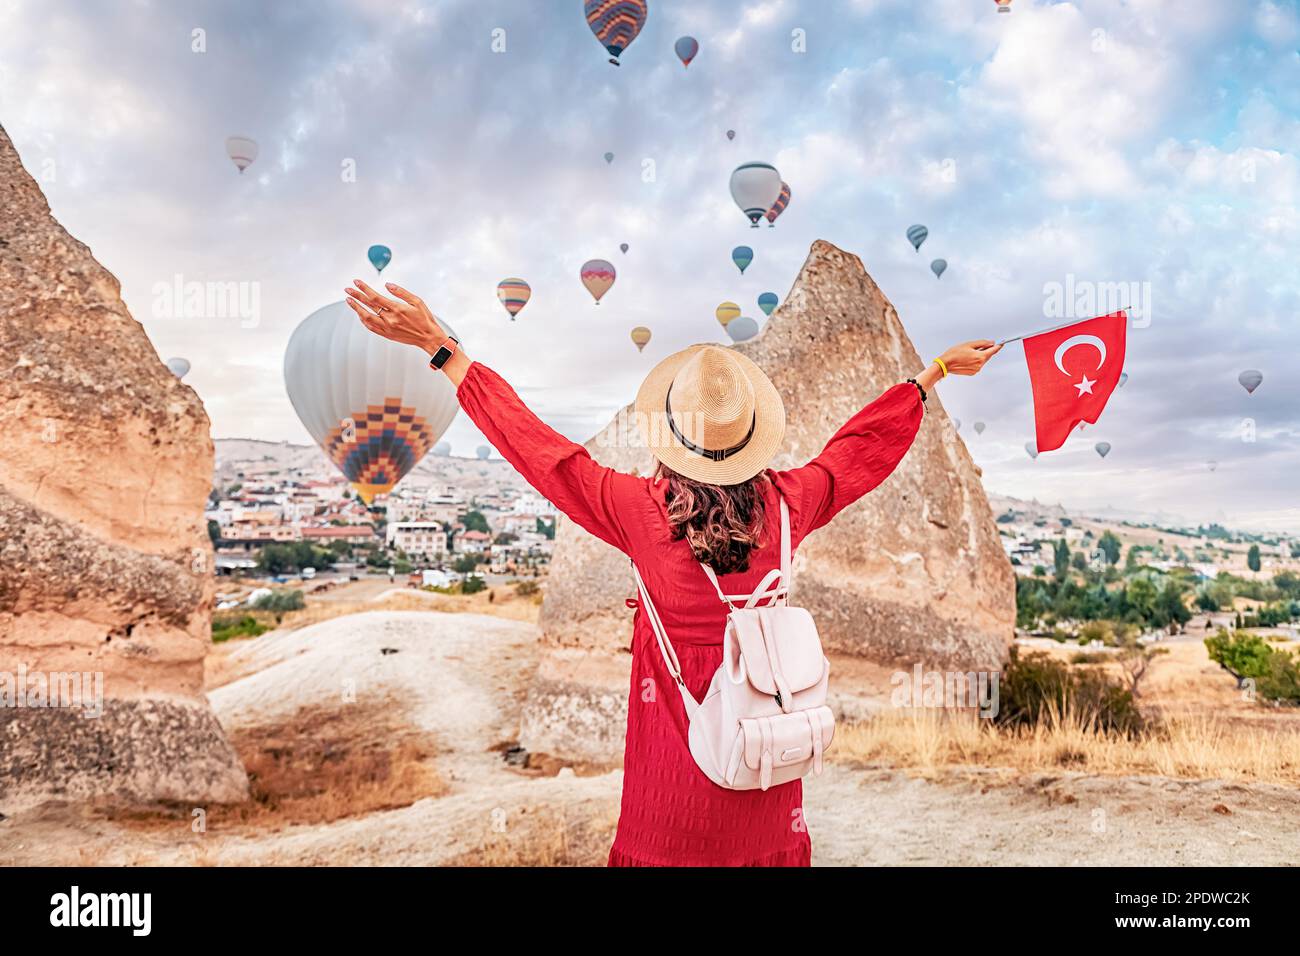 Take in the breathtaking views of Cappadocia, Turkey with a young woman as she watches the iconic hot air balloons and proudly displays the Turkish fl Stock Photo